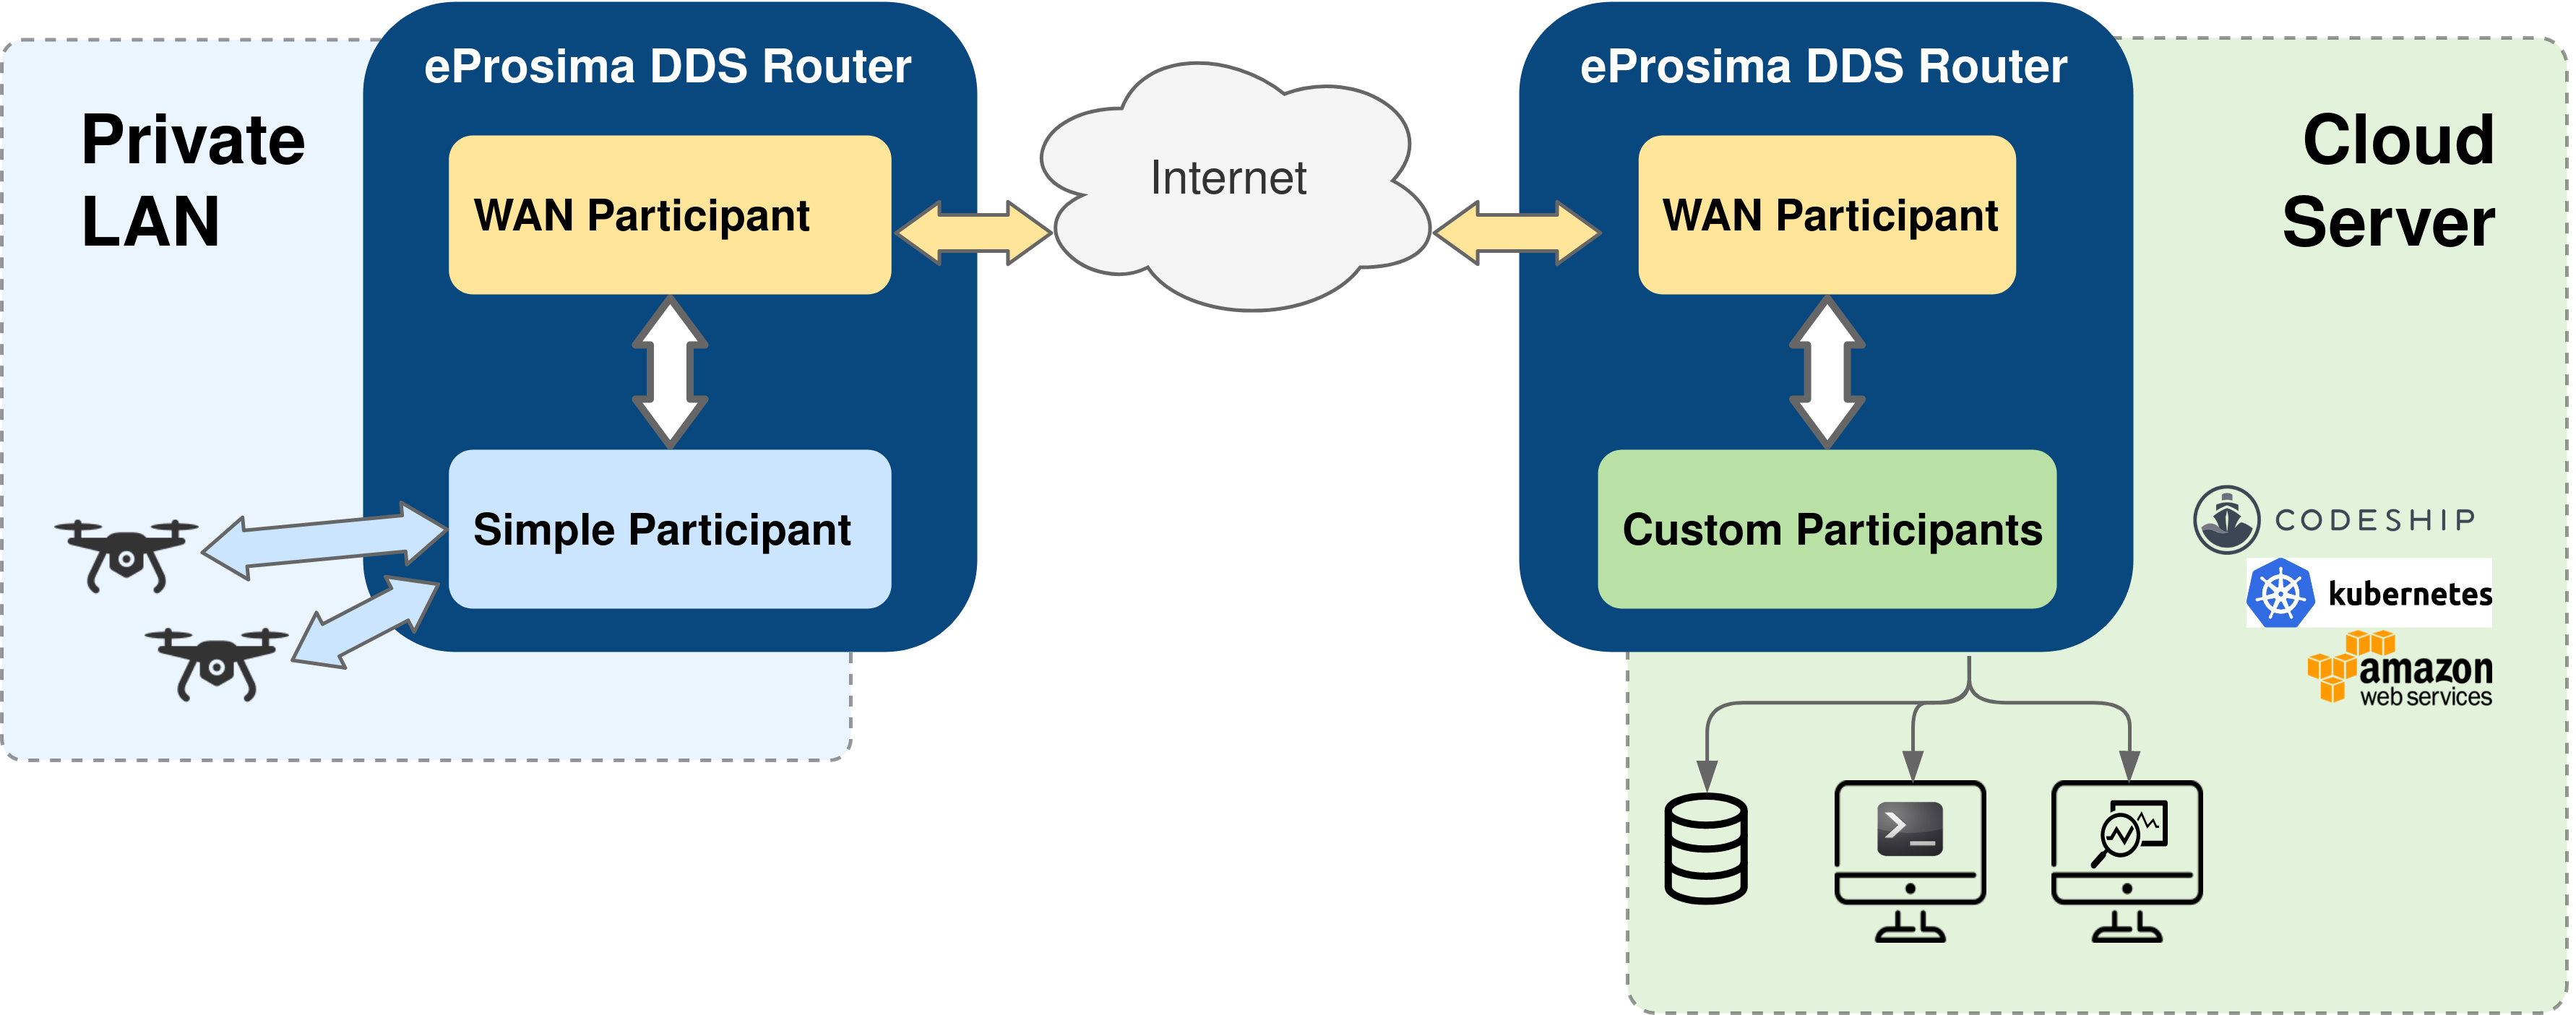 ../../_images/ddsrouter_overview_wan.png